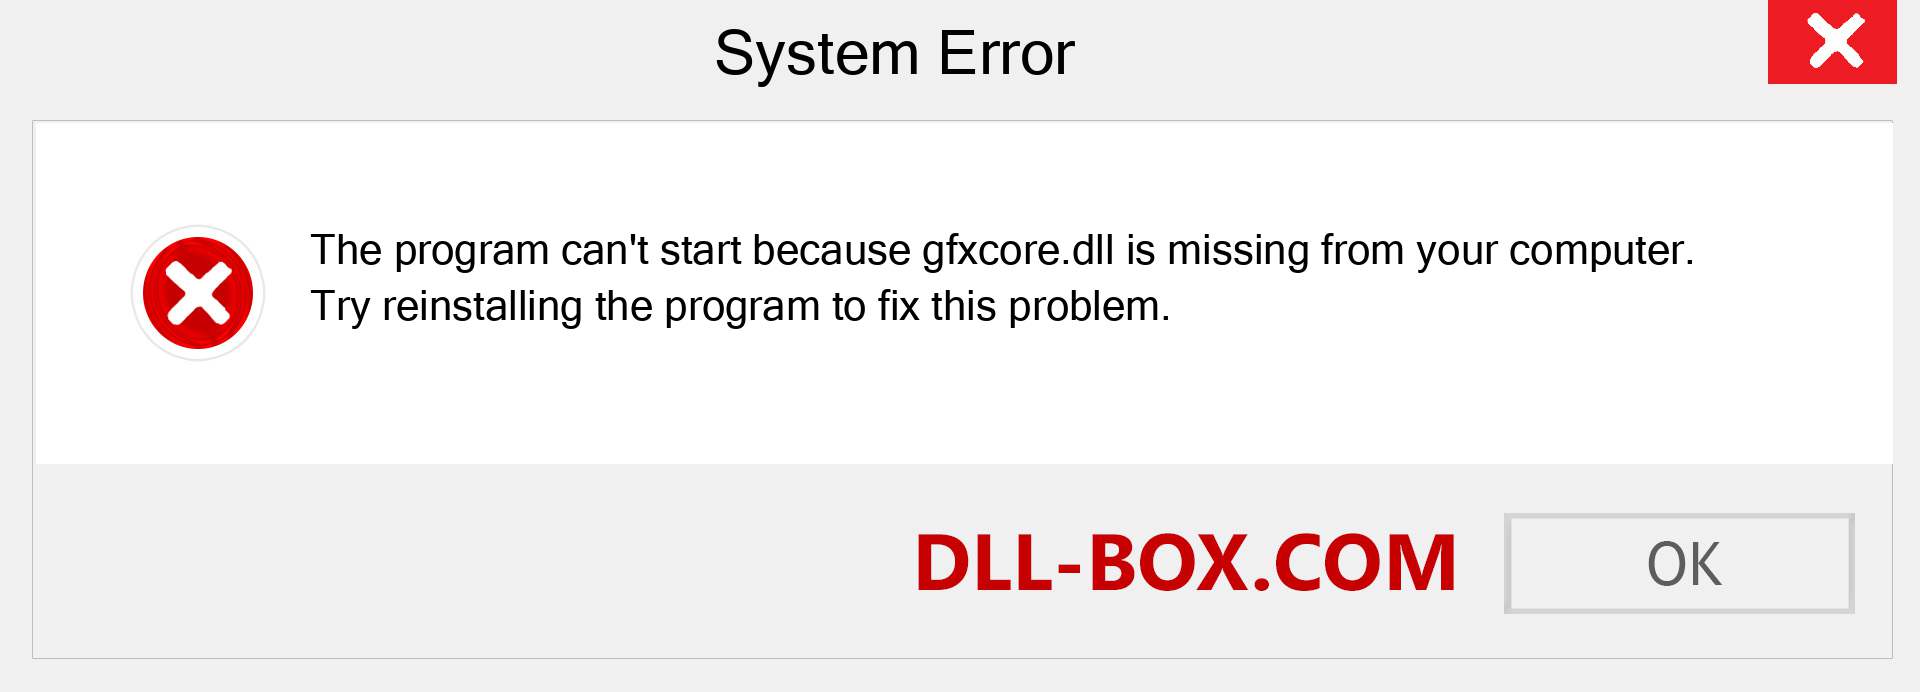  gfxcore.dll file is missing?. Download for Windows 7, 8, 10 - Fix  gfxcore dll Missing Error on Windows, photos, images